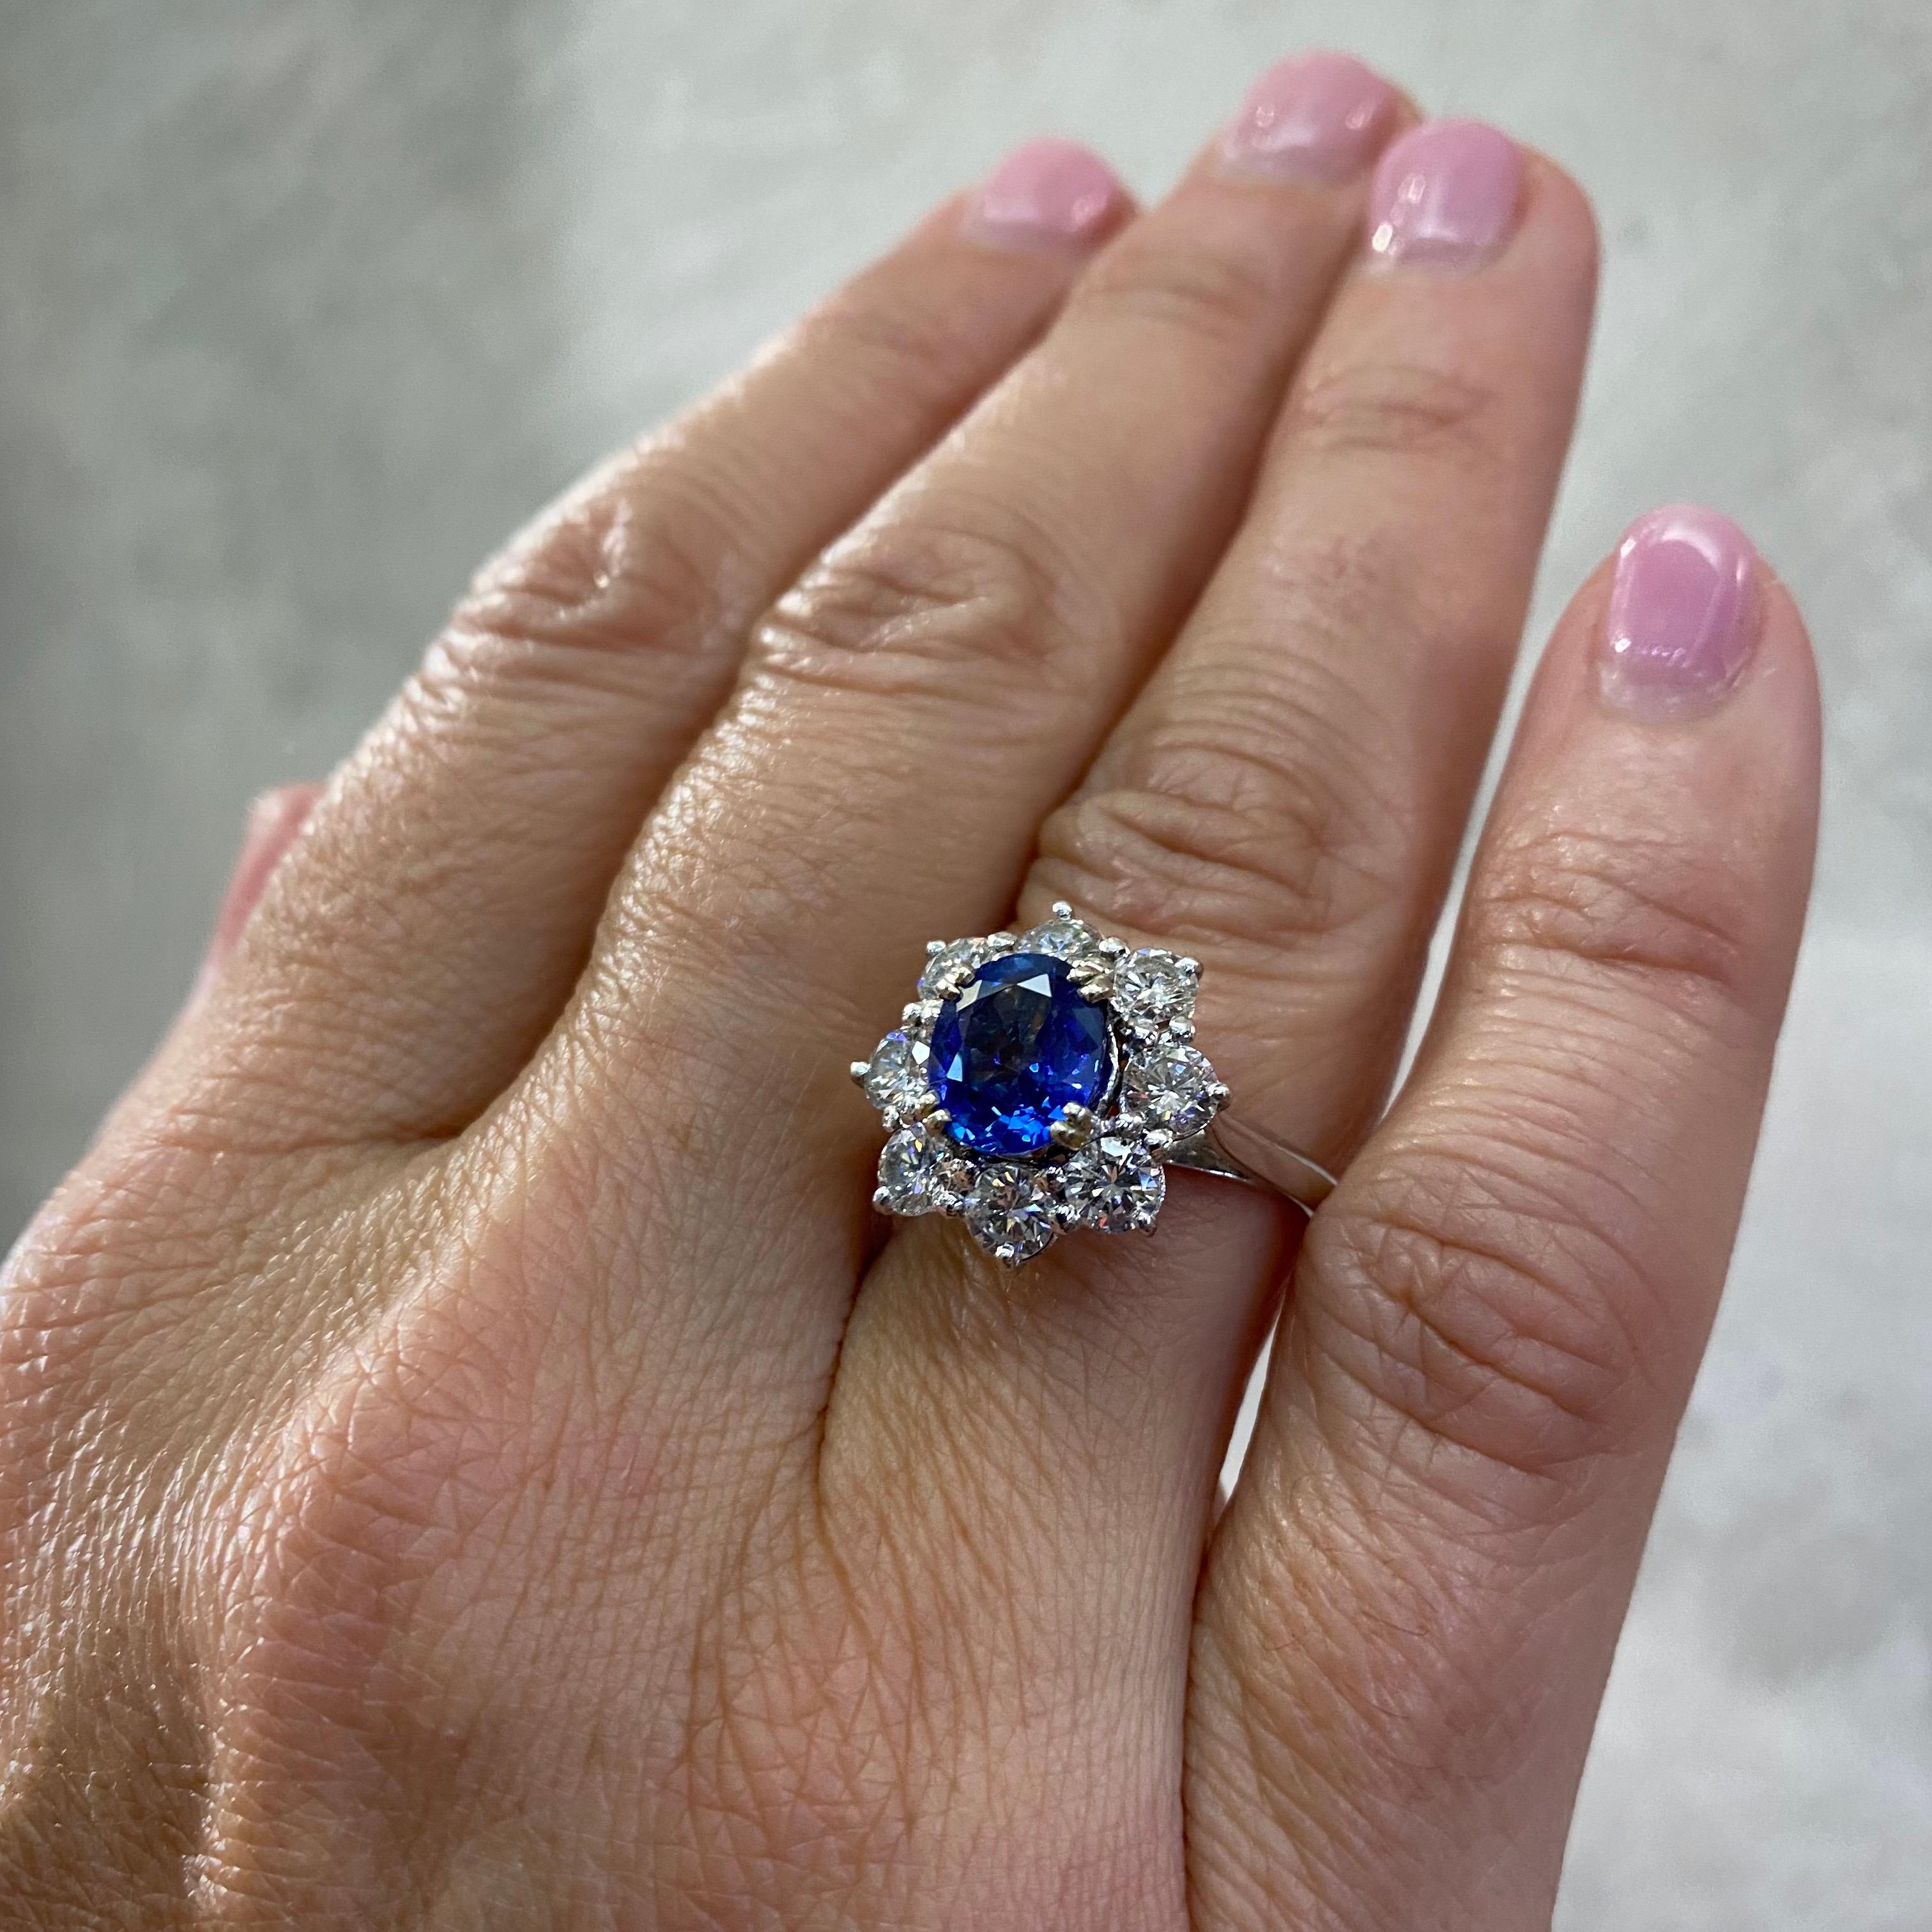 Boucheron Mid-Century Ceylon sapphire and round brilliant-cut diamond cluster engagement ring in 18kt white gold, France, 1950s/1960s. A creation by the first of the main contemporary jewelers to open a boutique on Place Vêndome, this French jewel